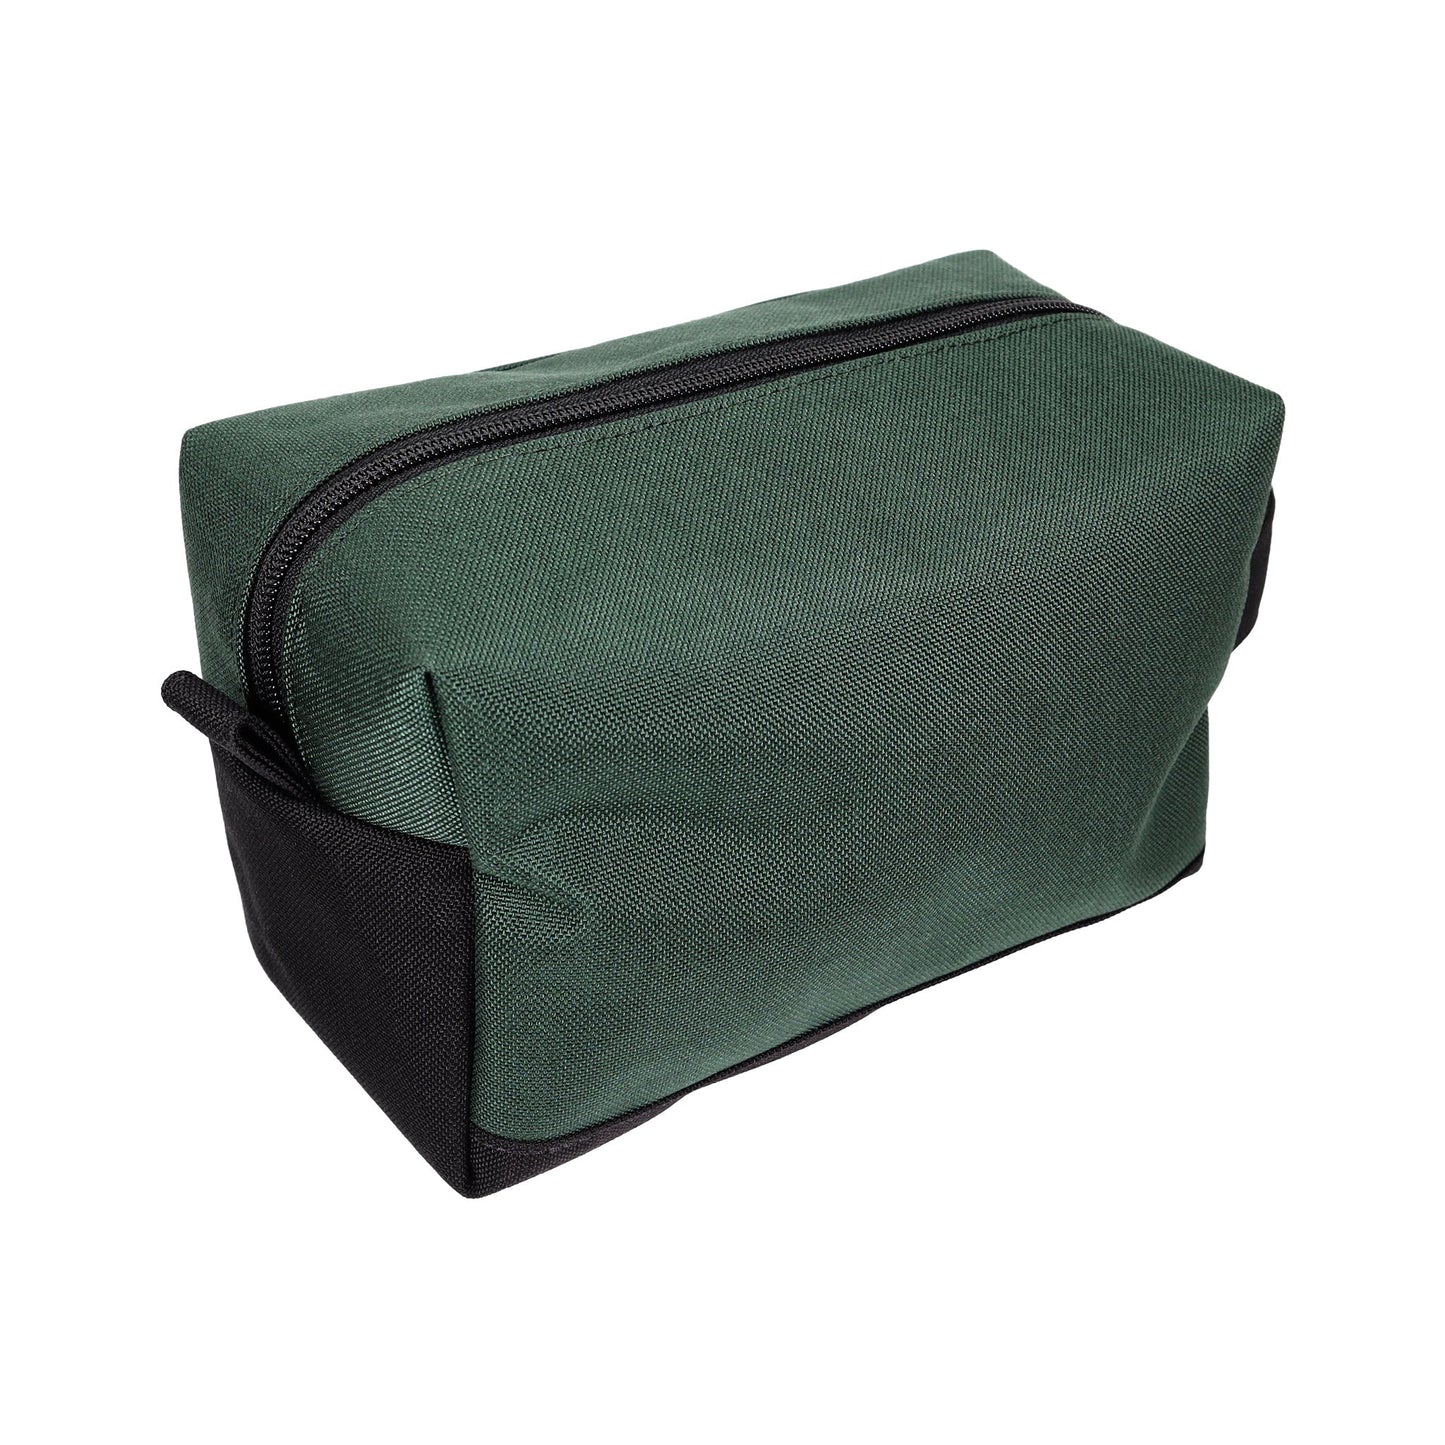 Green and Black Tall Canvas Toiletry Bag